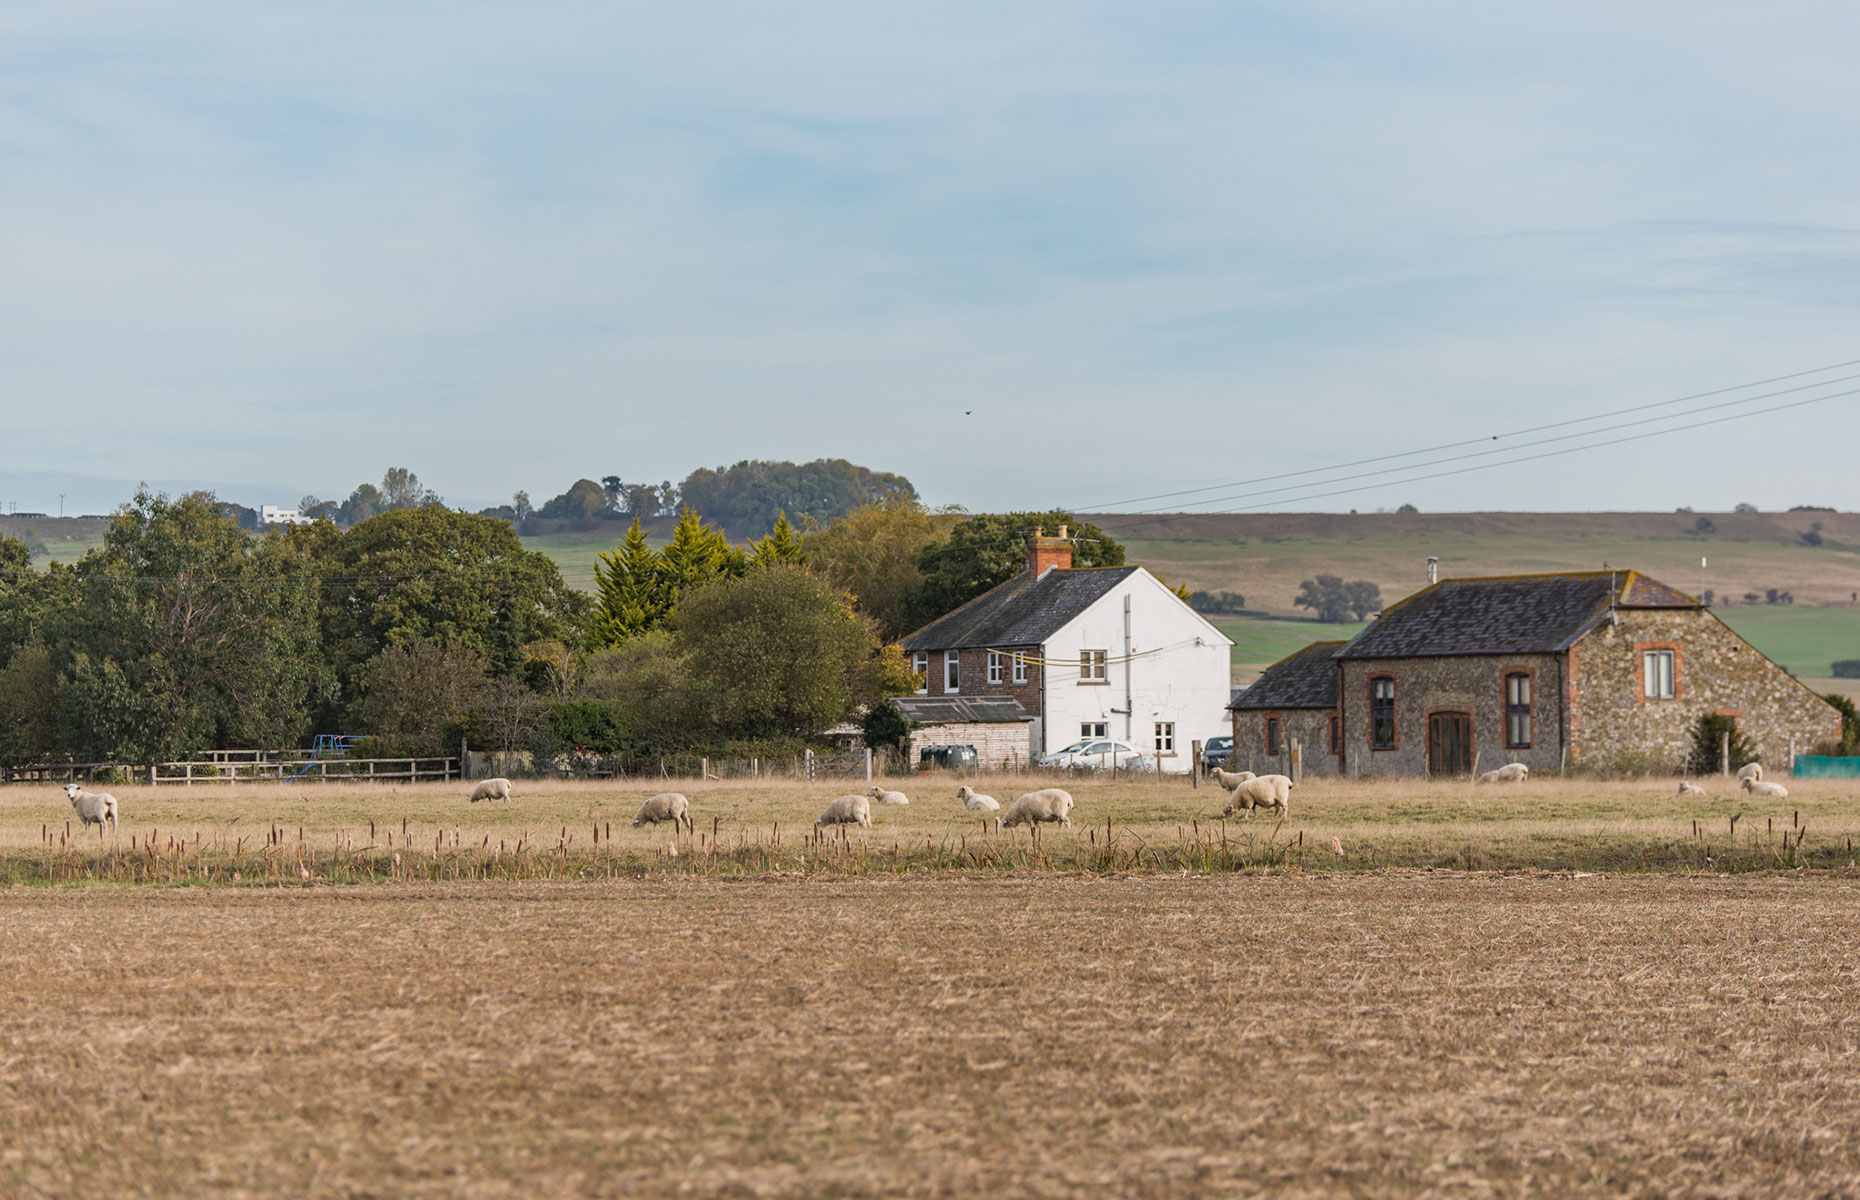 View of the Romney Marsh area (Image: Matilda Delves Photography)